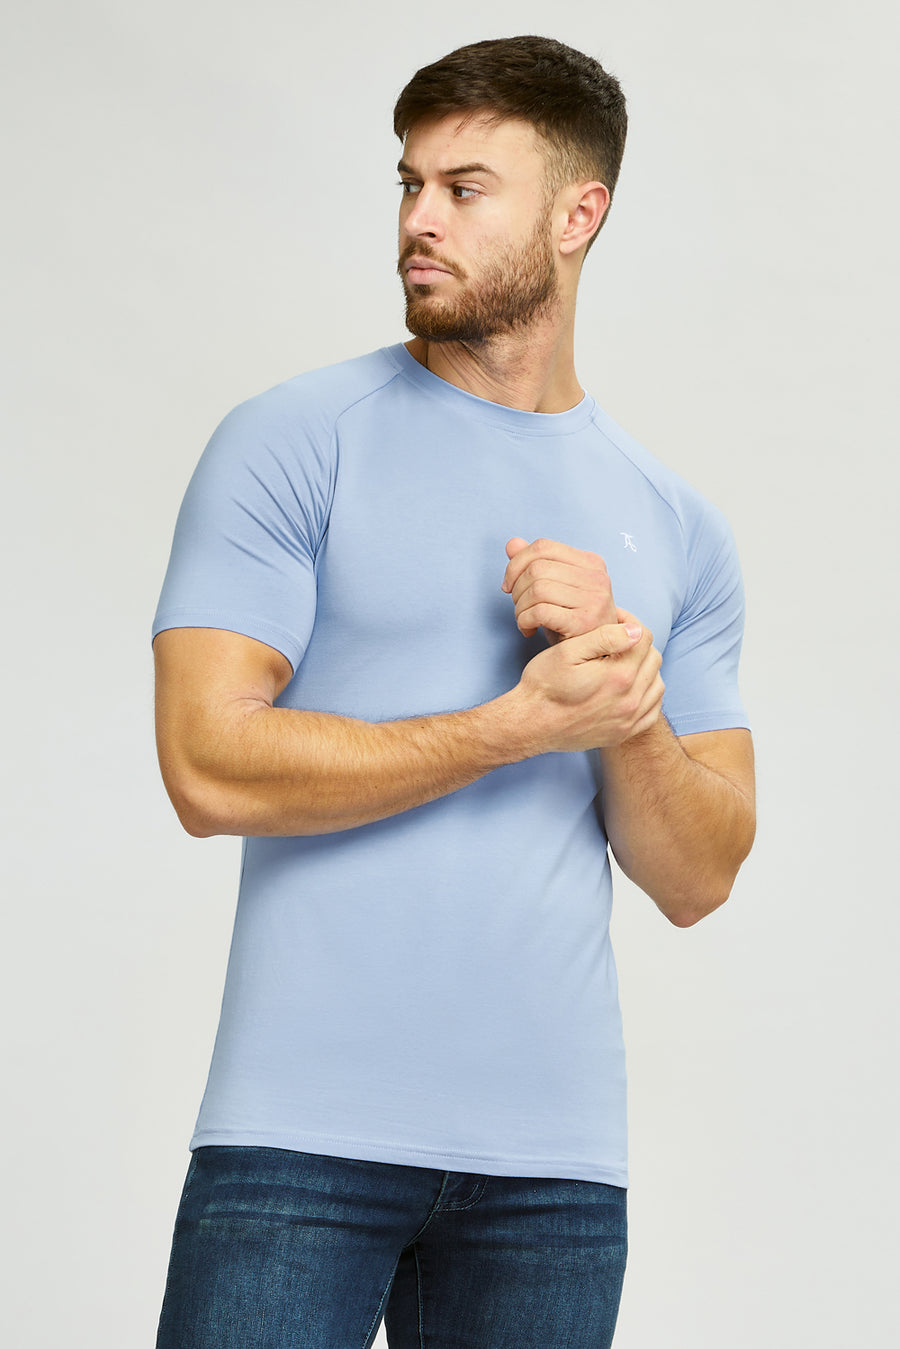 Athletic Fit T-Shirt in Lavender Blue - TAILORED ATHLETE - USA